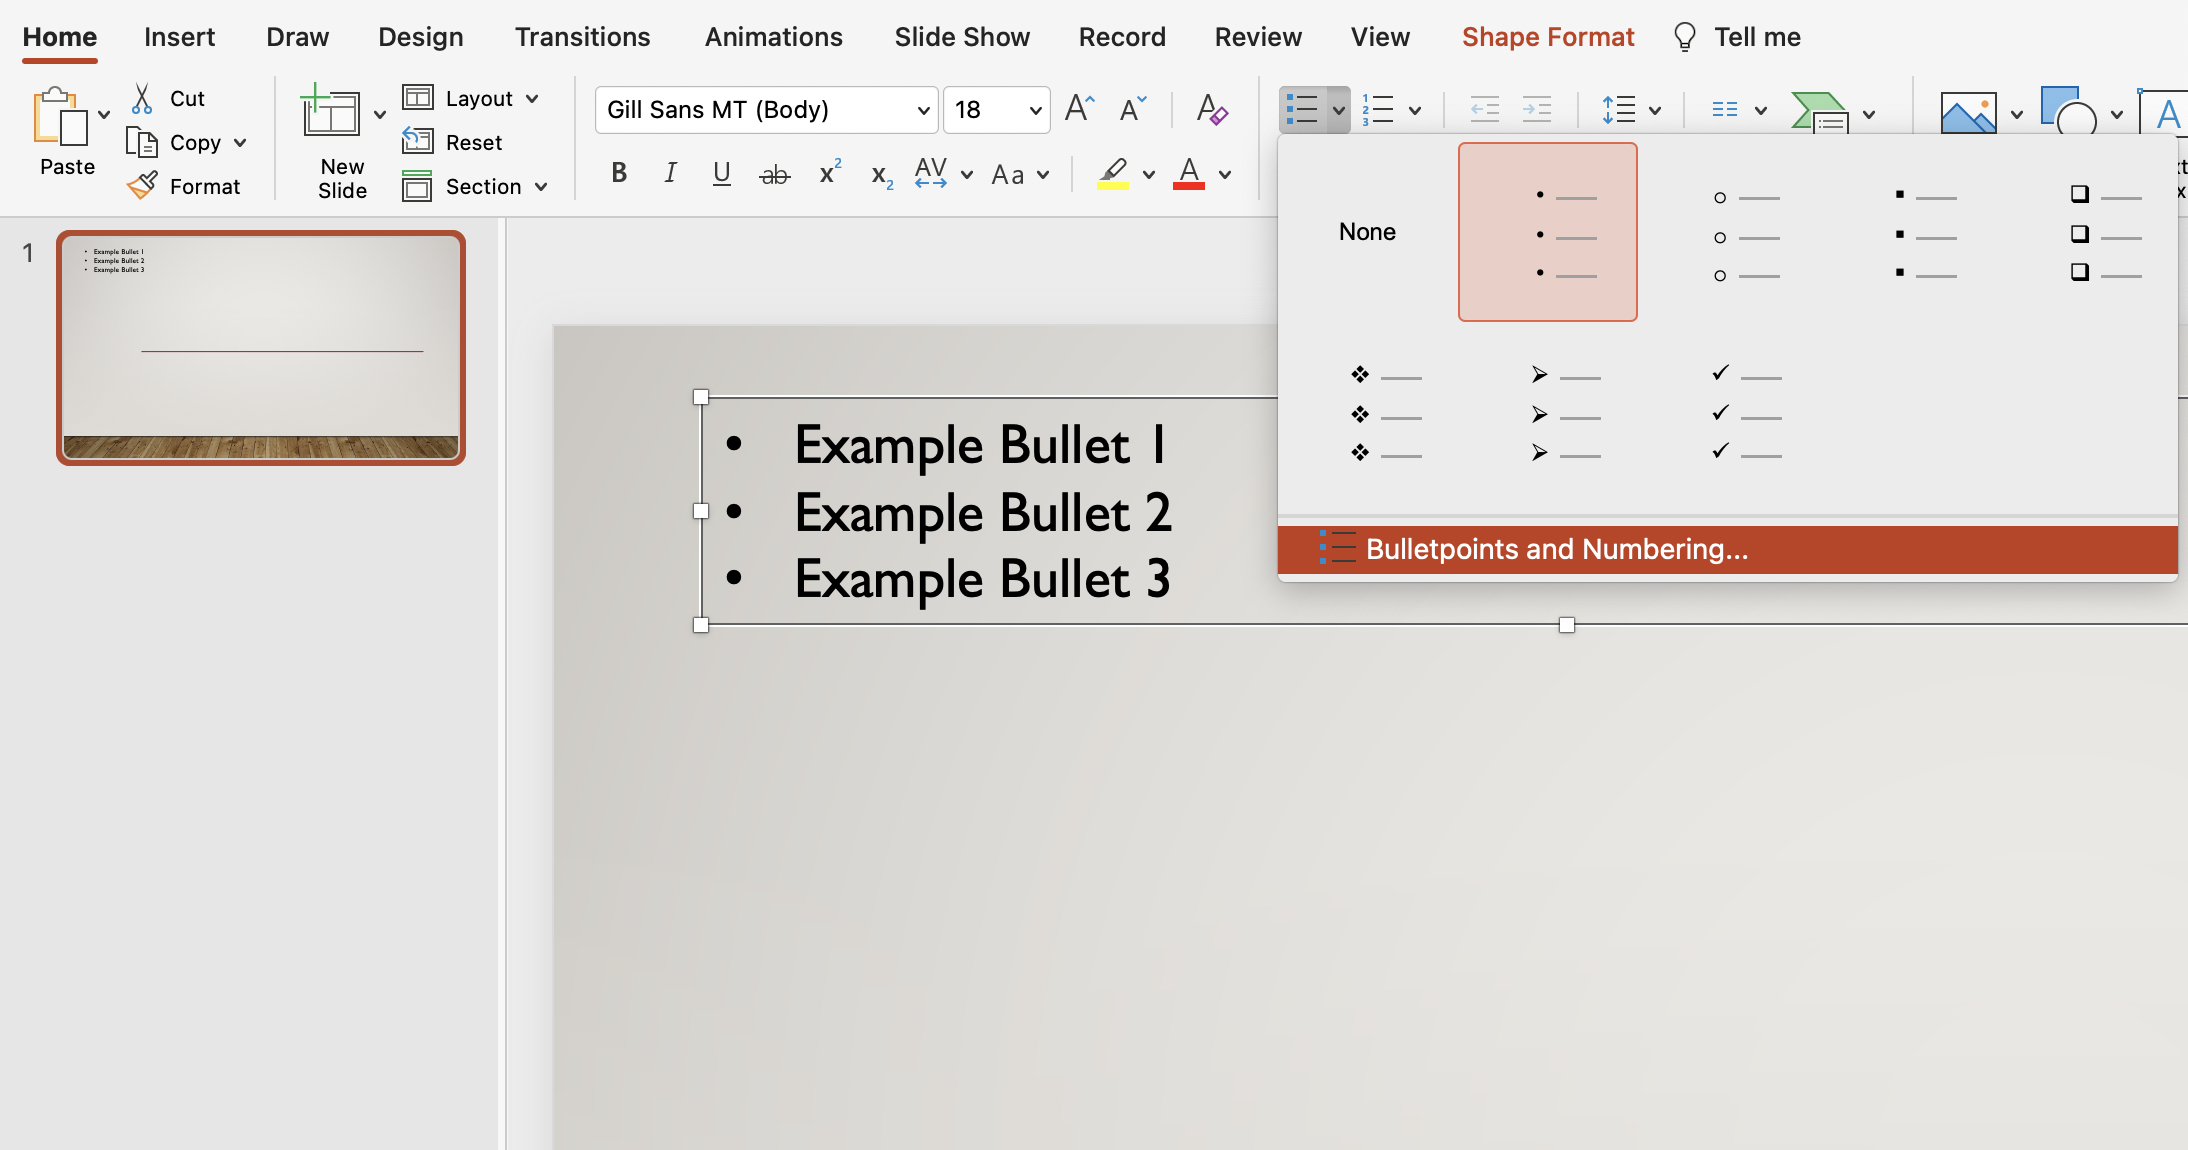 Click Bullet Points and Numbering